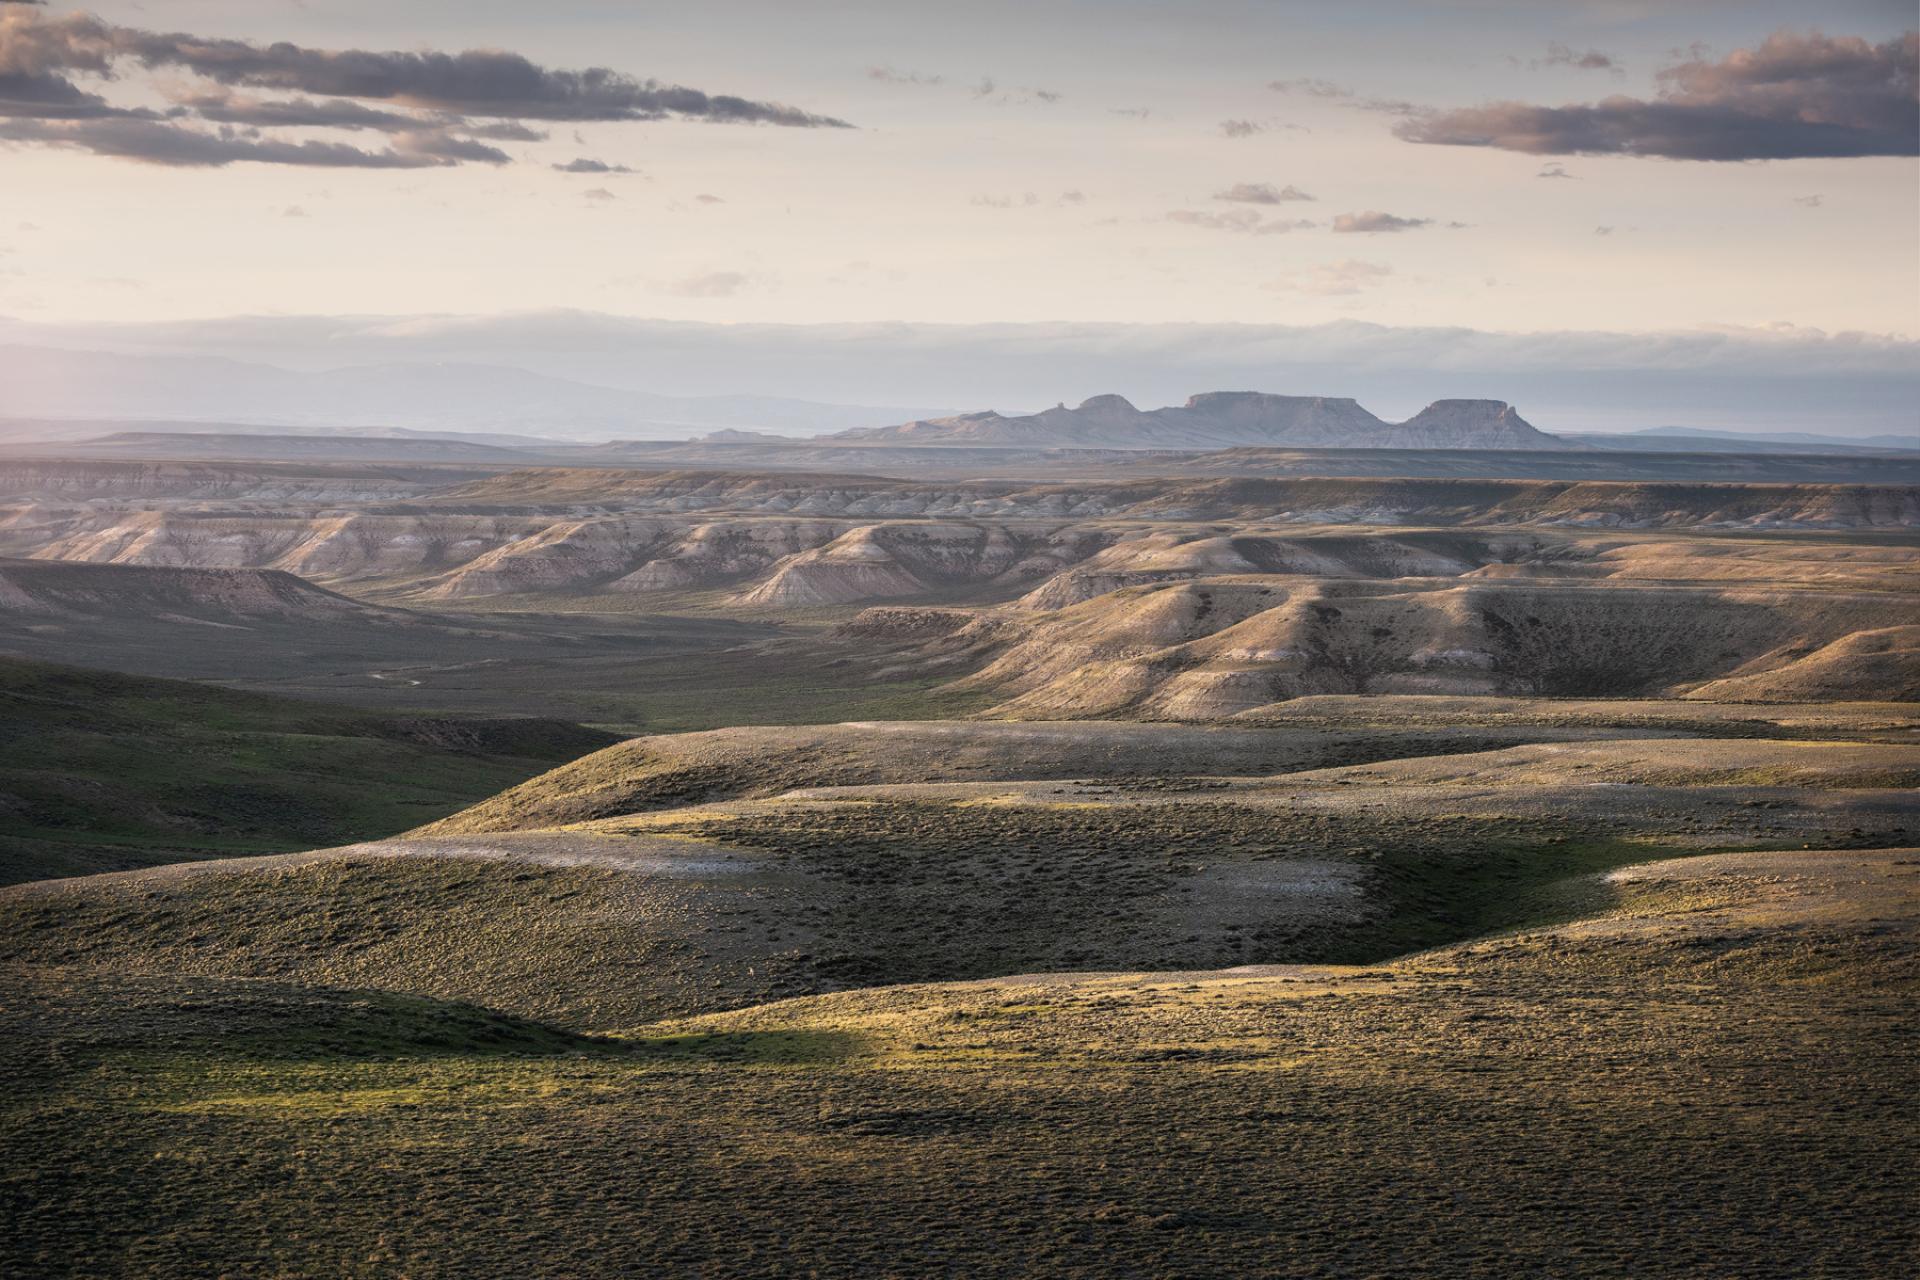 Rolling hills and rocky buttes in the Northern Red Desert, Wyoming